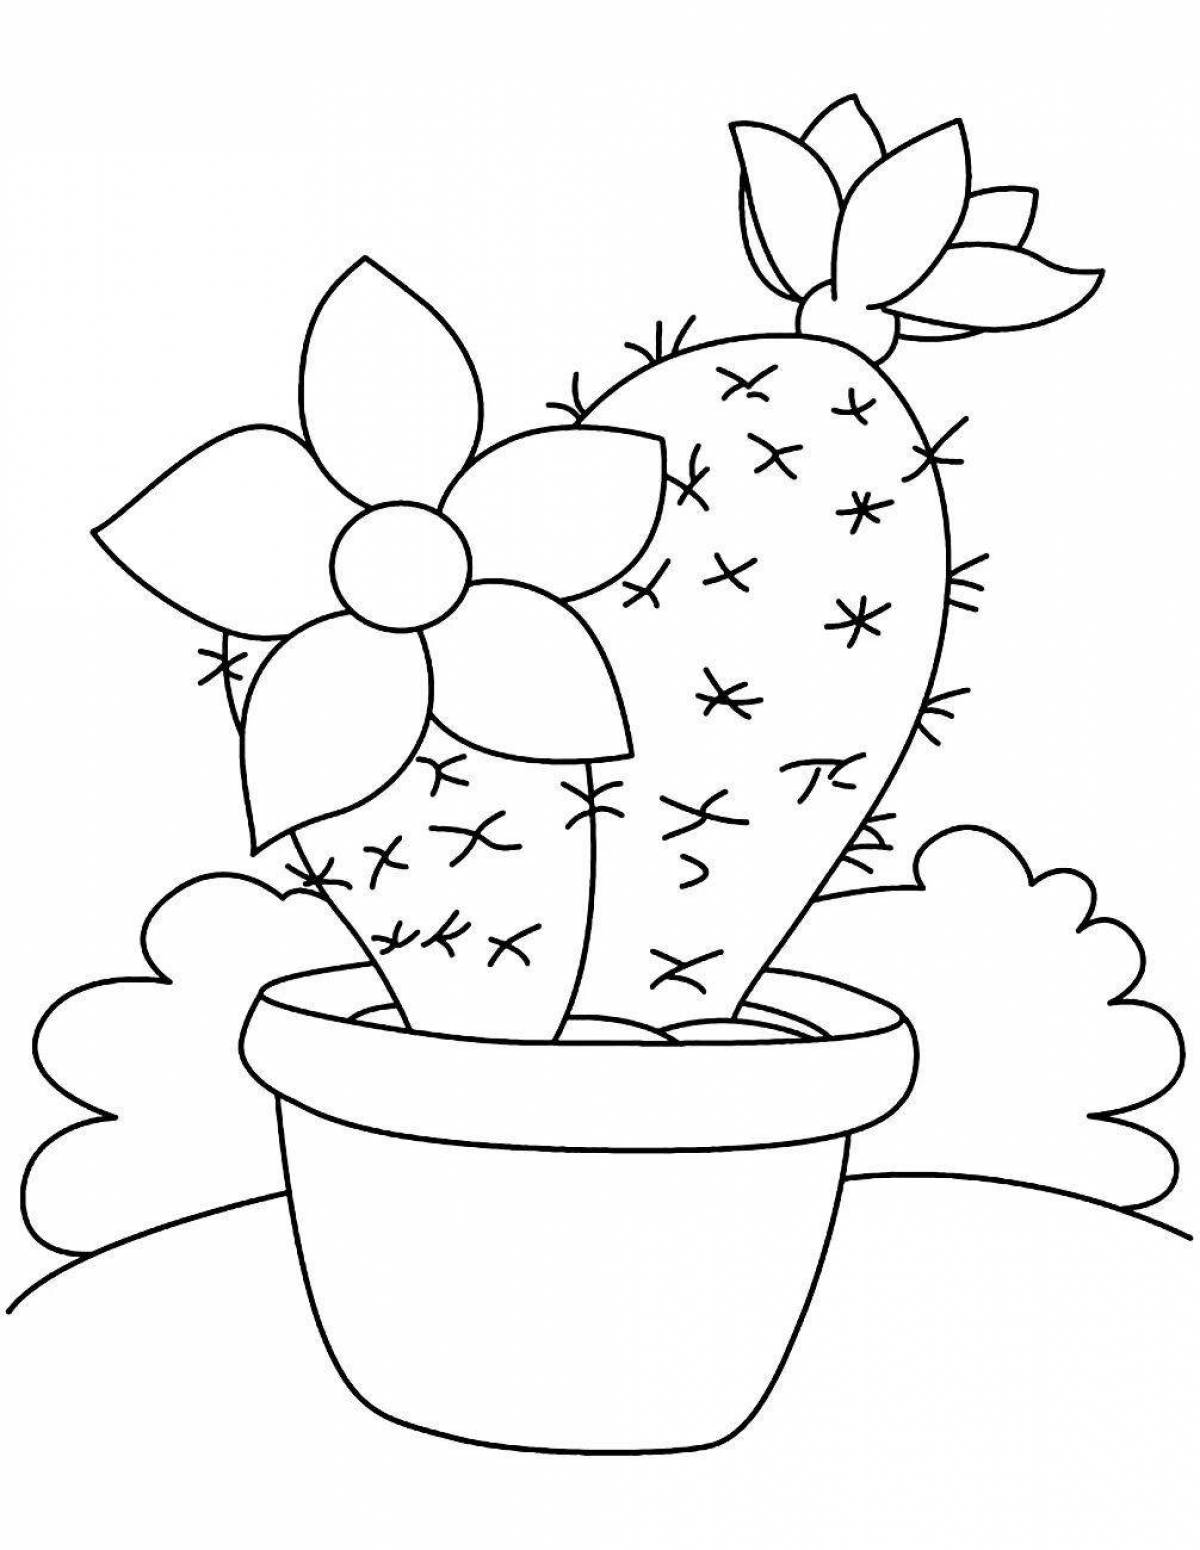 Fun coloring houseplants for children 3-4 years old